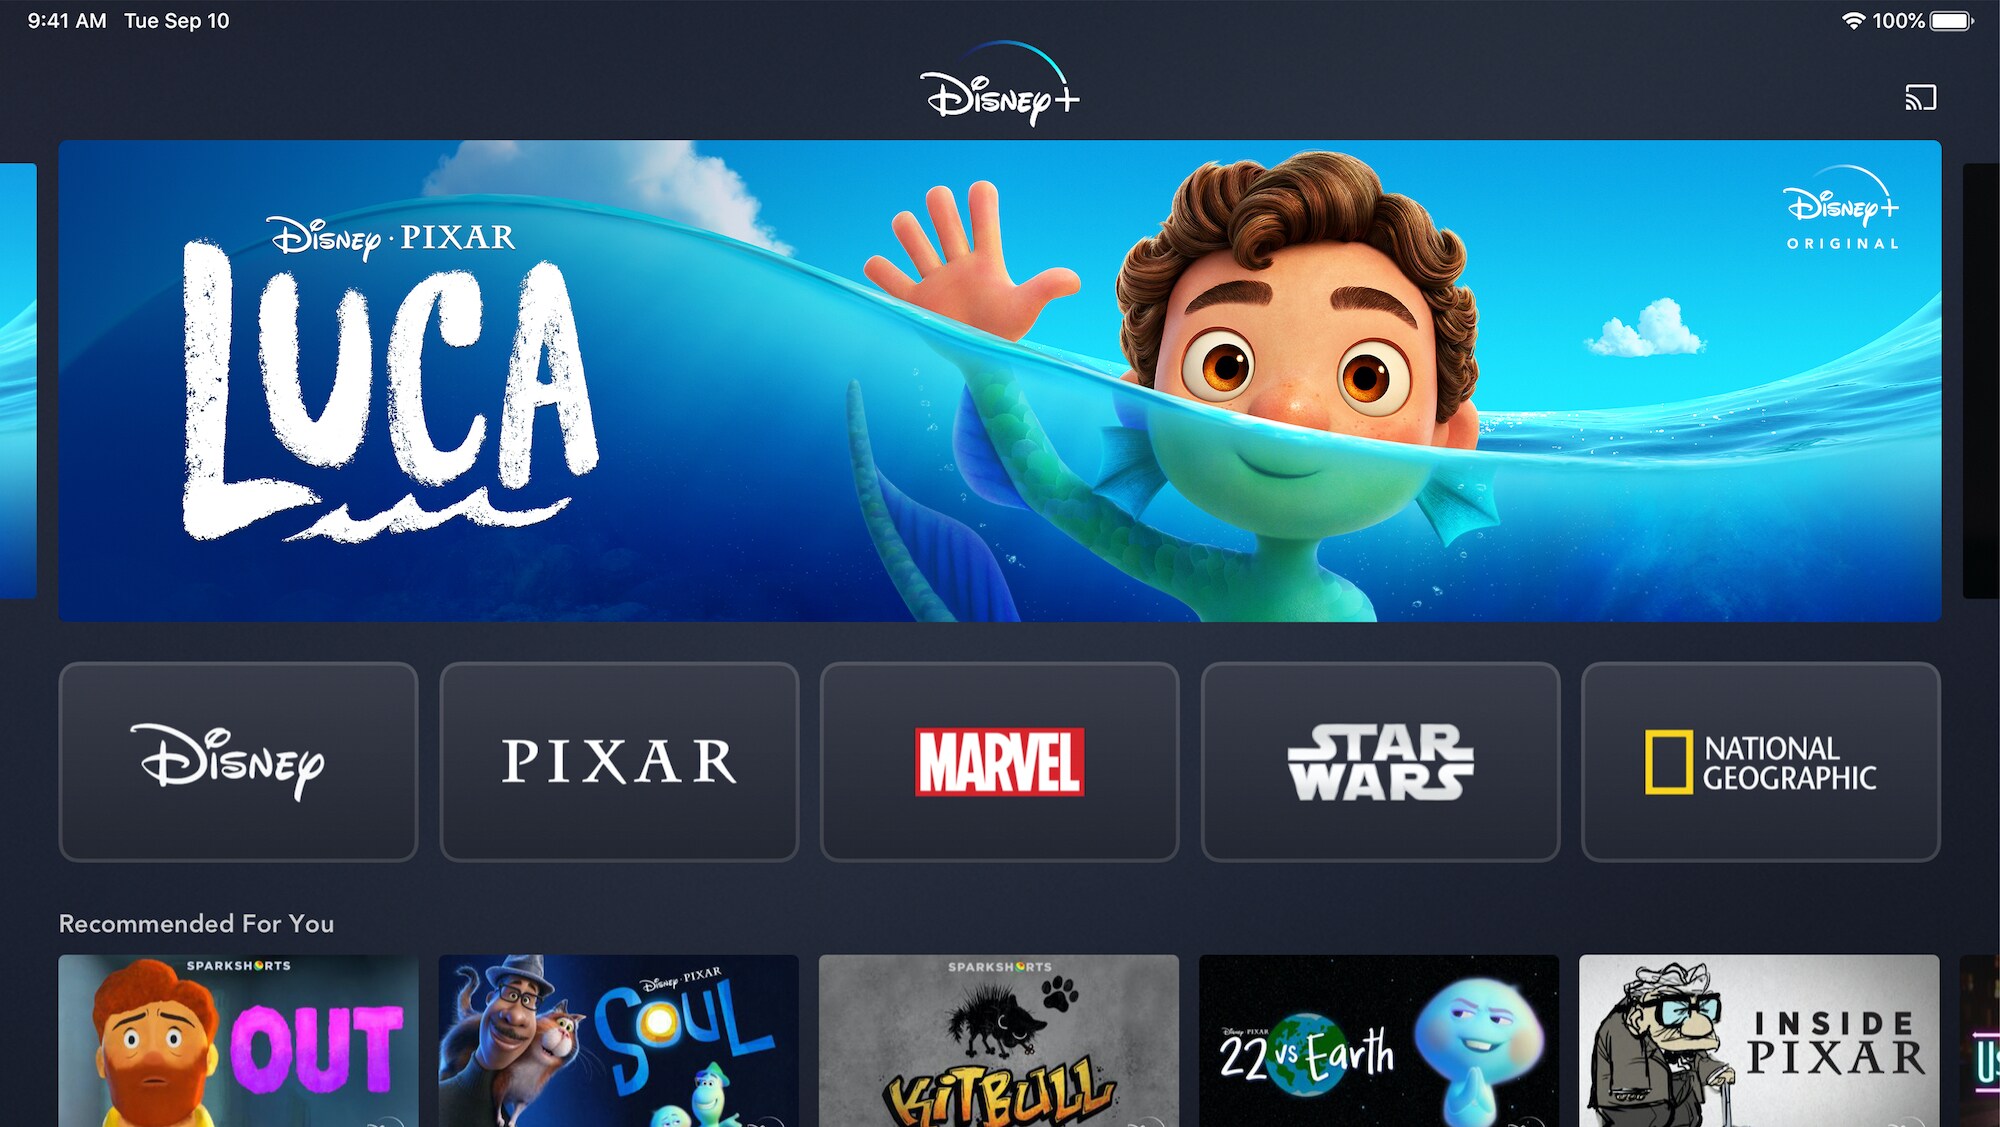 Disney+ App Home Page on Tablet